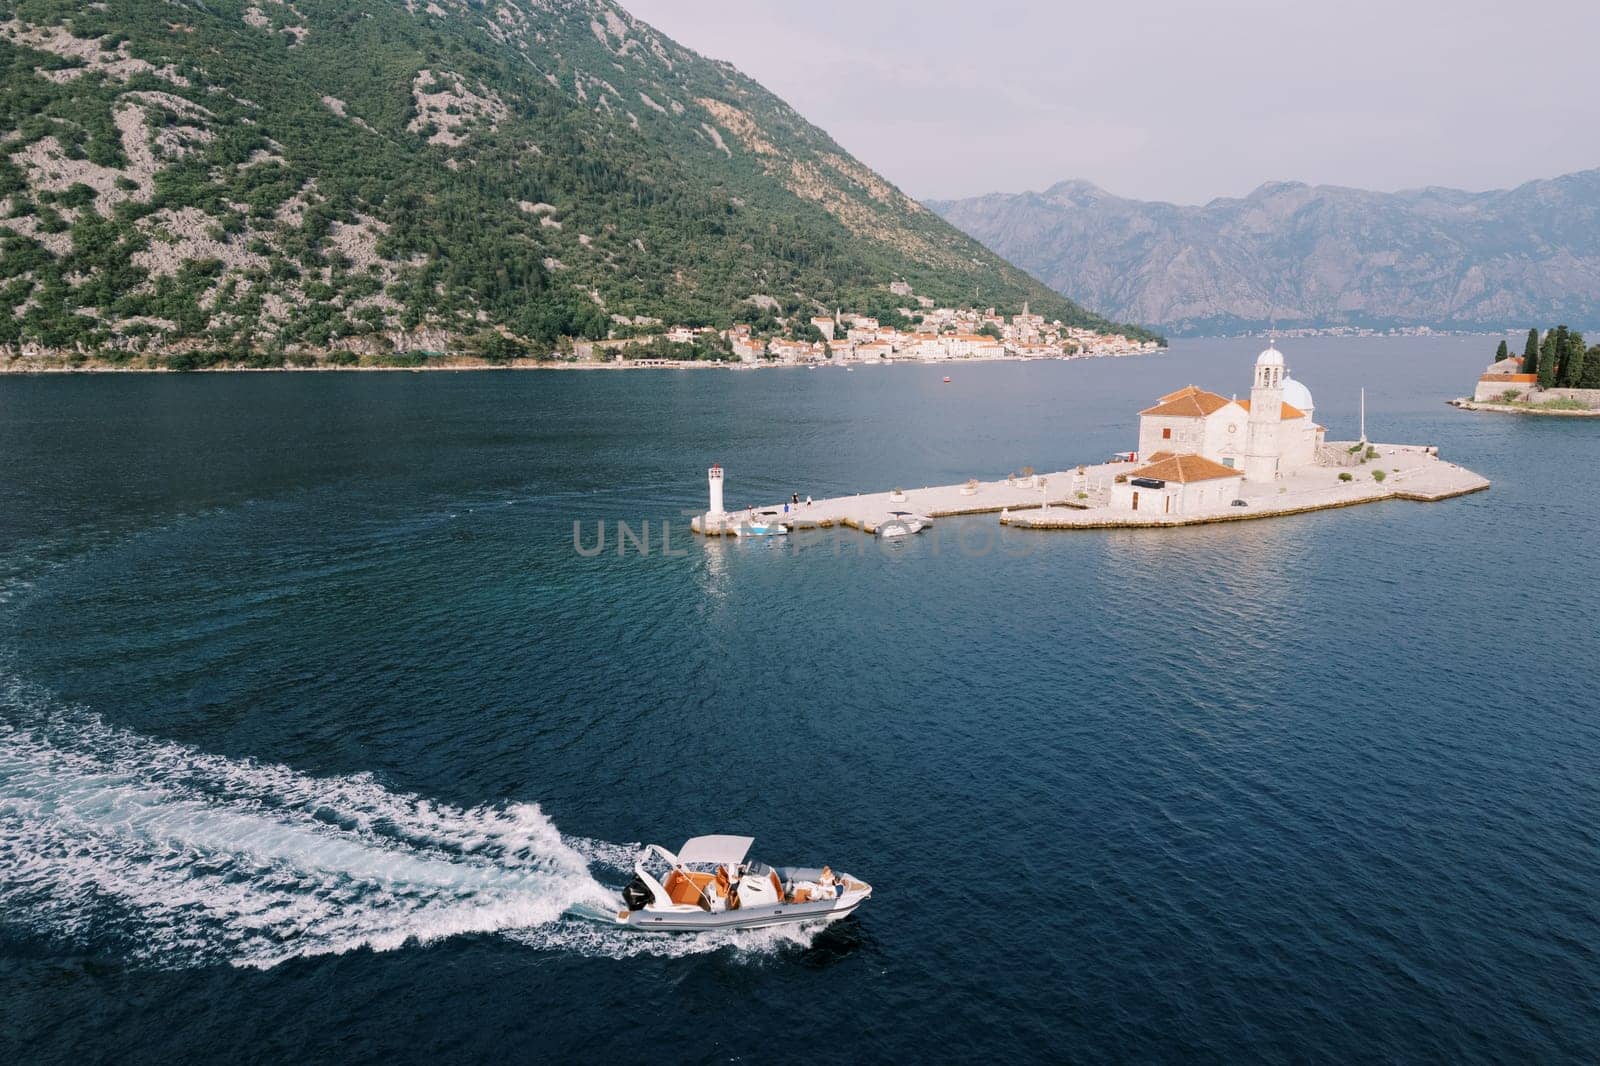 Motorboat sails on the sea past the Church of Our Lady on the Rocks of the island of Gospa od Skrpjela. Montenegro. Drone by Nadtochiy